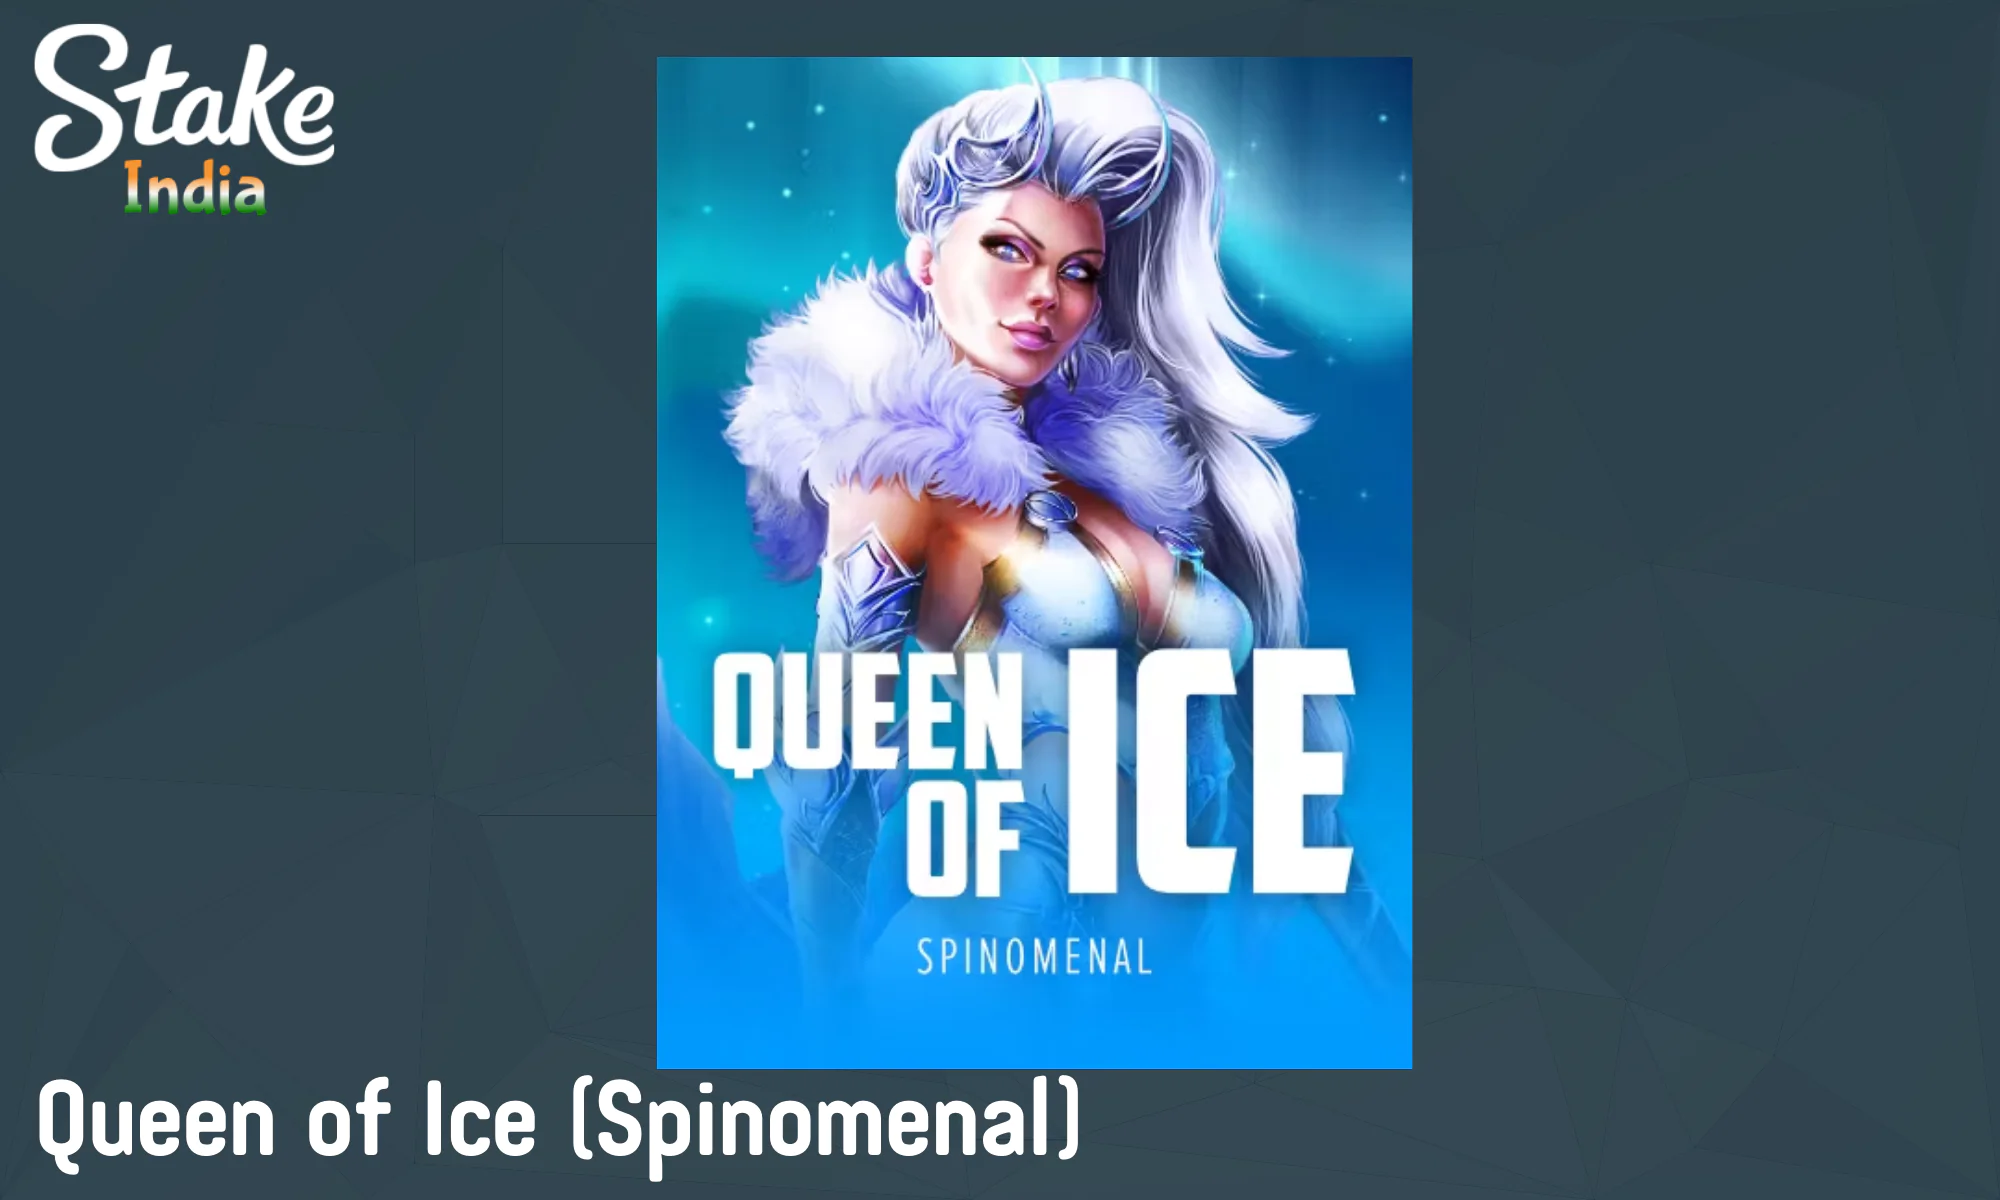 Queen of Ice This 5-reel slot has 25 paylines that you can play in Stake